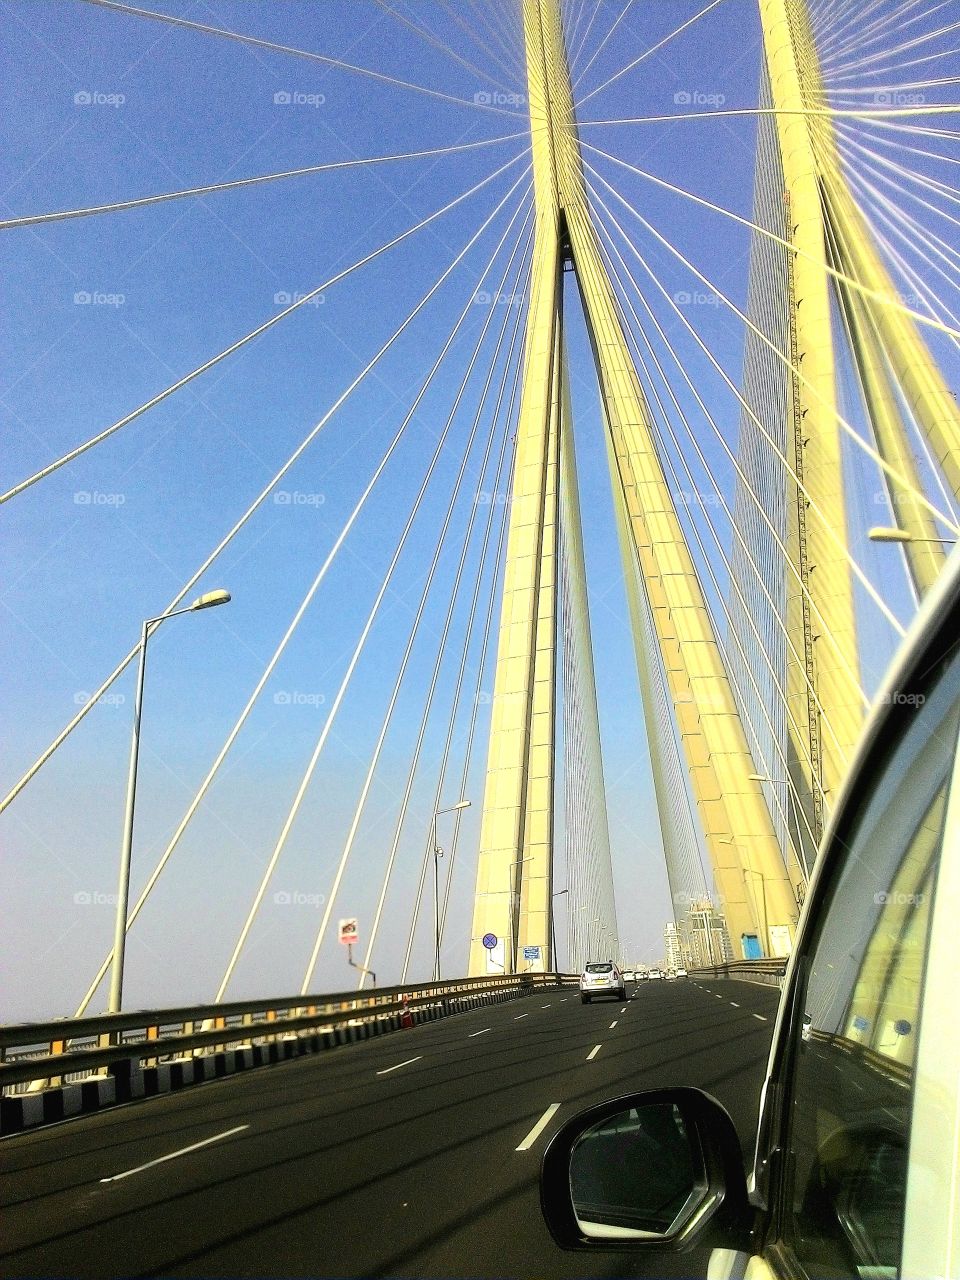 Sea Link in Mumbai... clicked in a moving car.